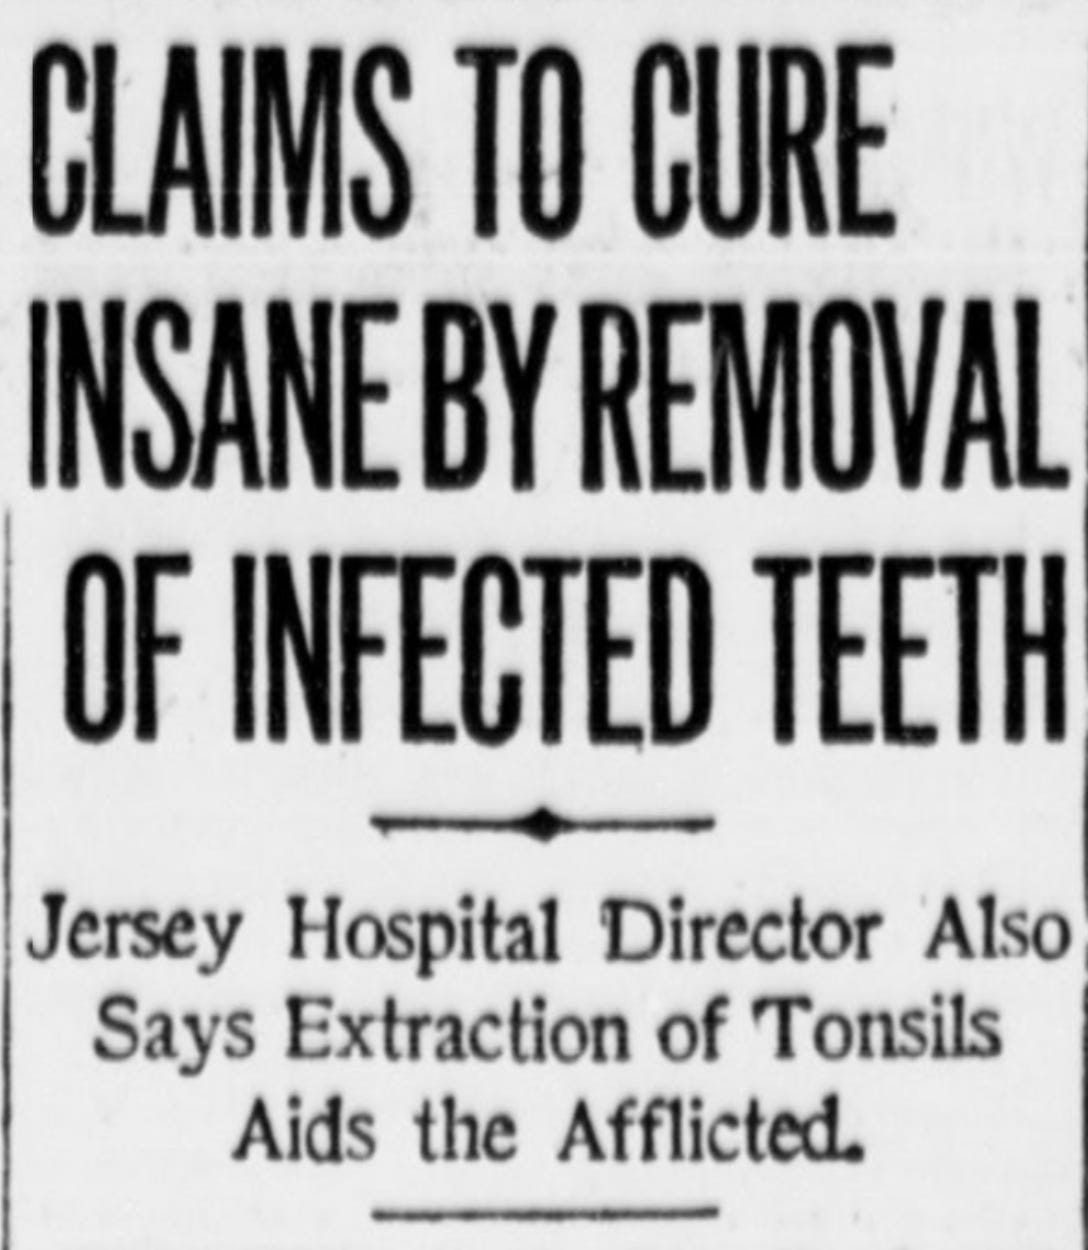 Newspaper headline reads: CLAIMS TO CURE INSANE BY REMOVAL OF TEETH"